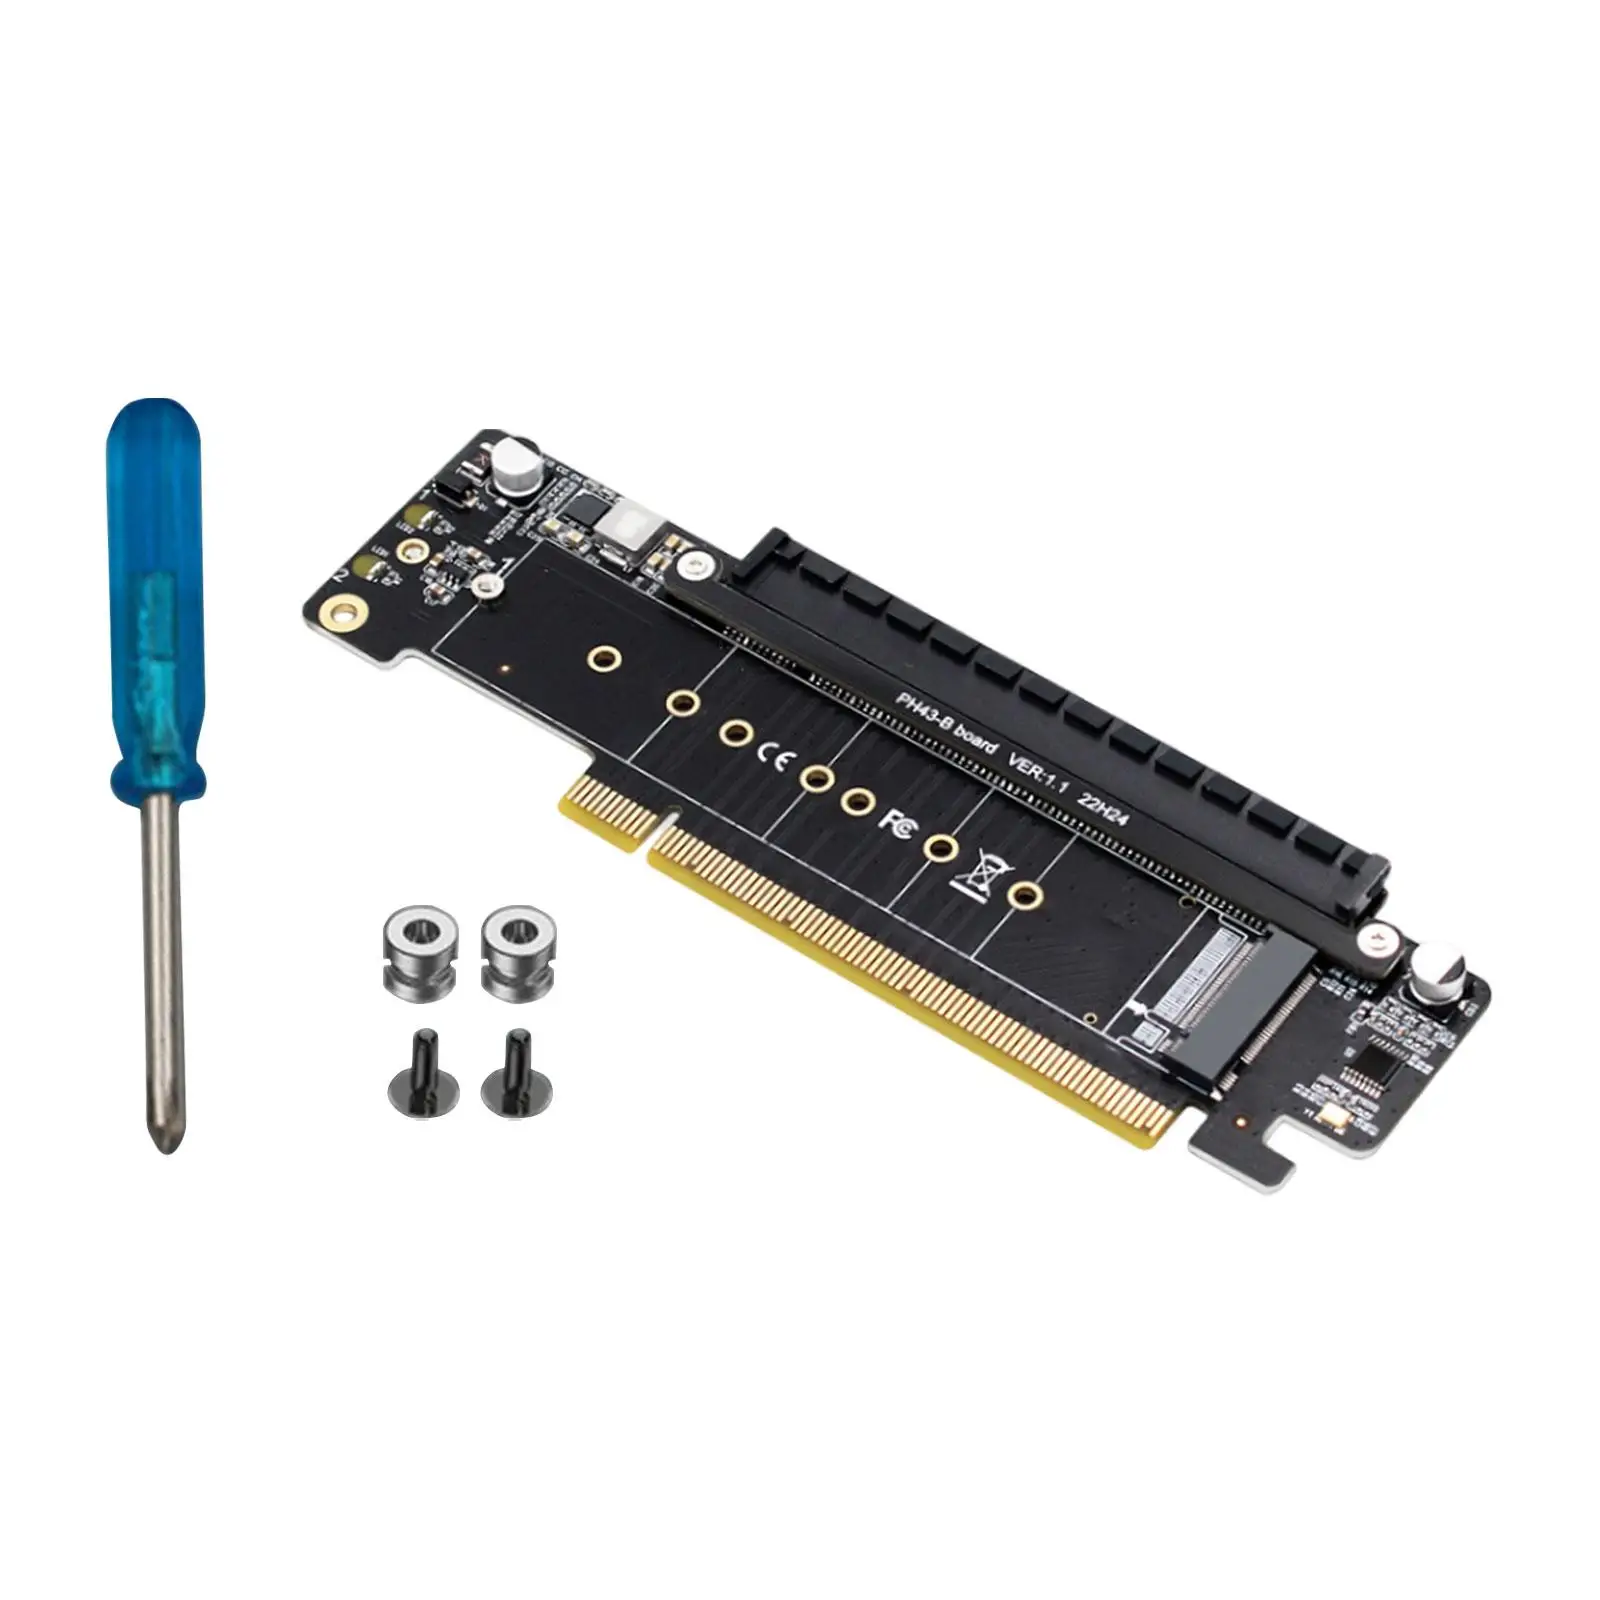 PCIe 4.0 x16 to 4x Expansion Card Metal Reliable Support 22110, 2280, 2260, 2242, 2230 Adapter Card Dual M.2 Adapter Accessories